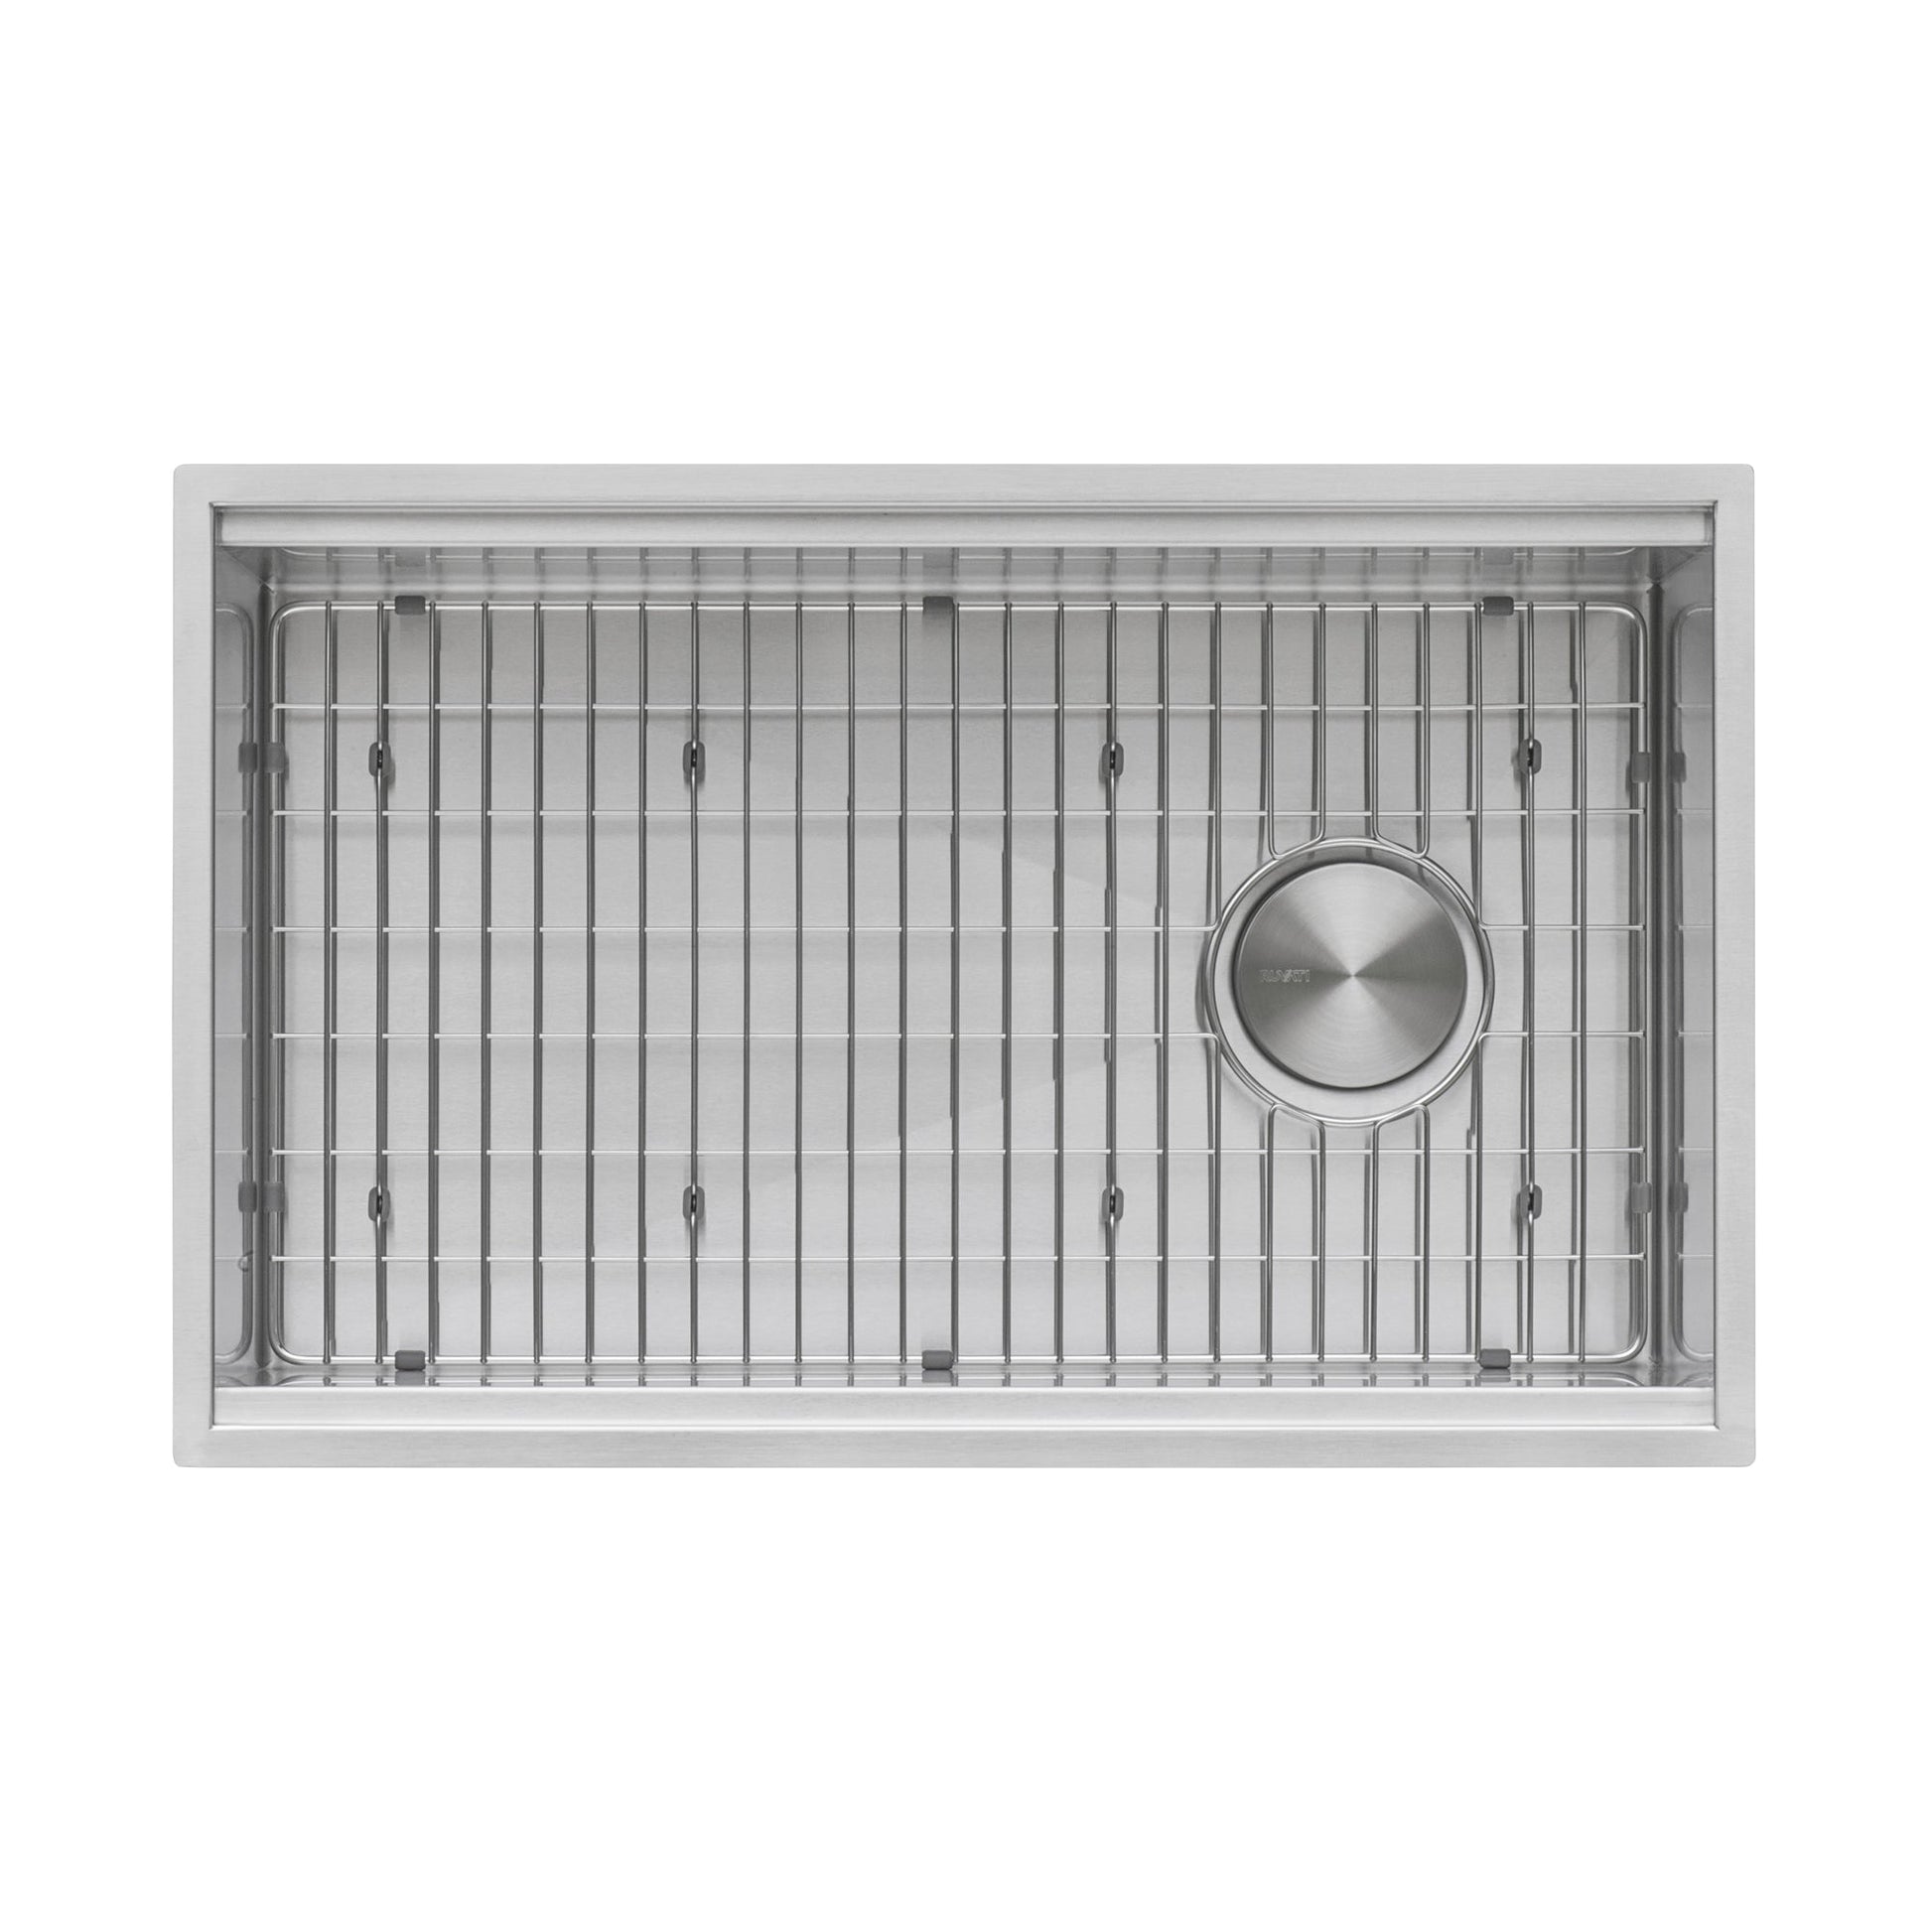 Ruvati Veniso 30” x 19" Undermount Stainless Steel Single Bowl Slope Bottom Offset Drain Workstation Sink With Bottom Rinse Grid and Drain Assembly